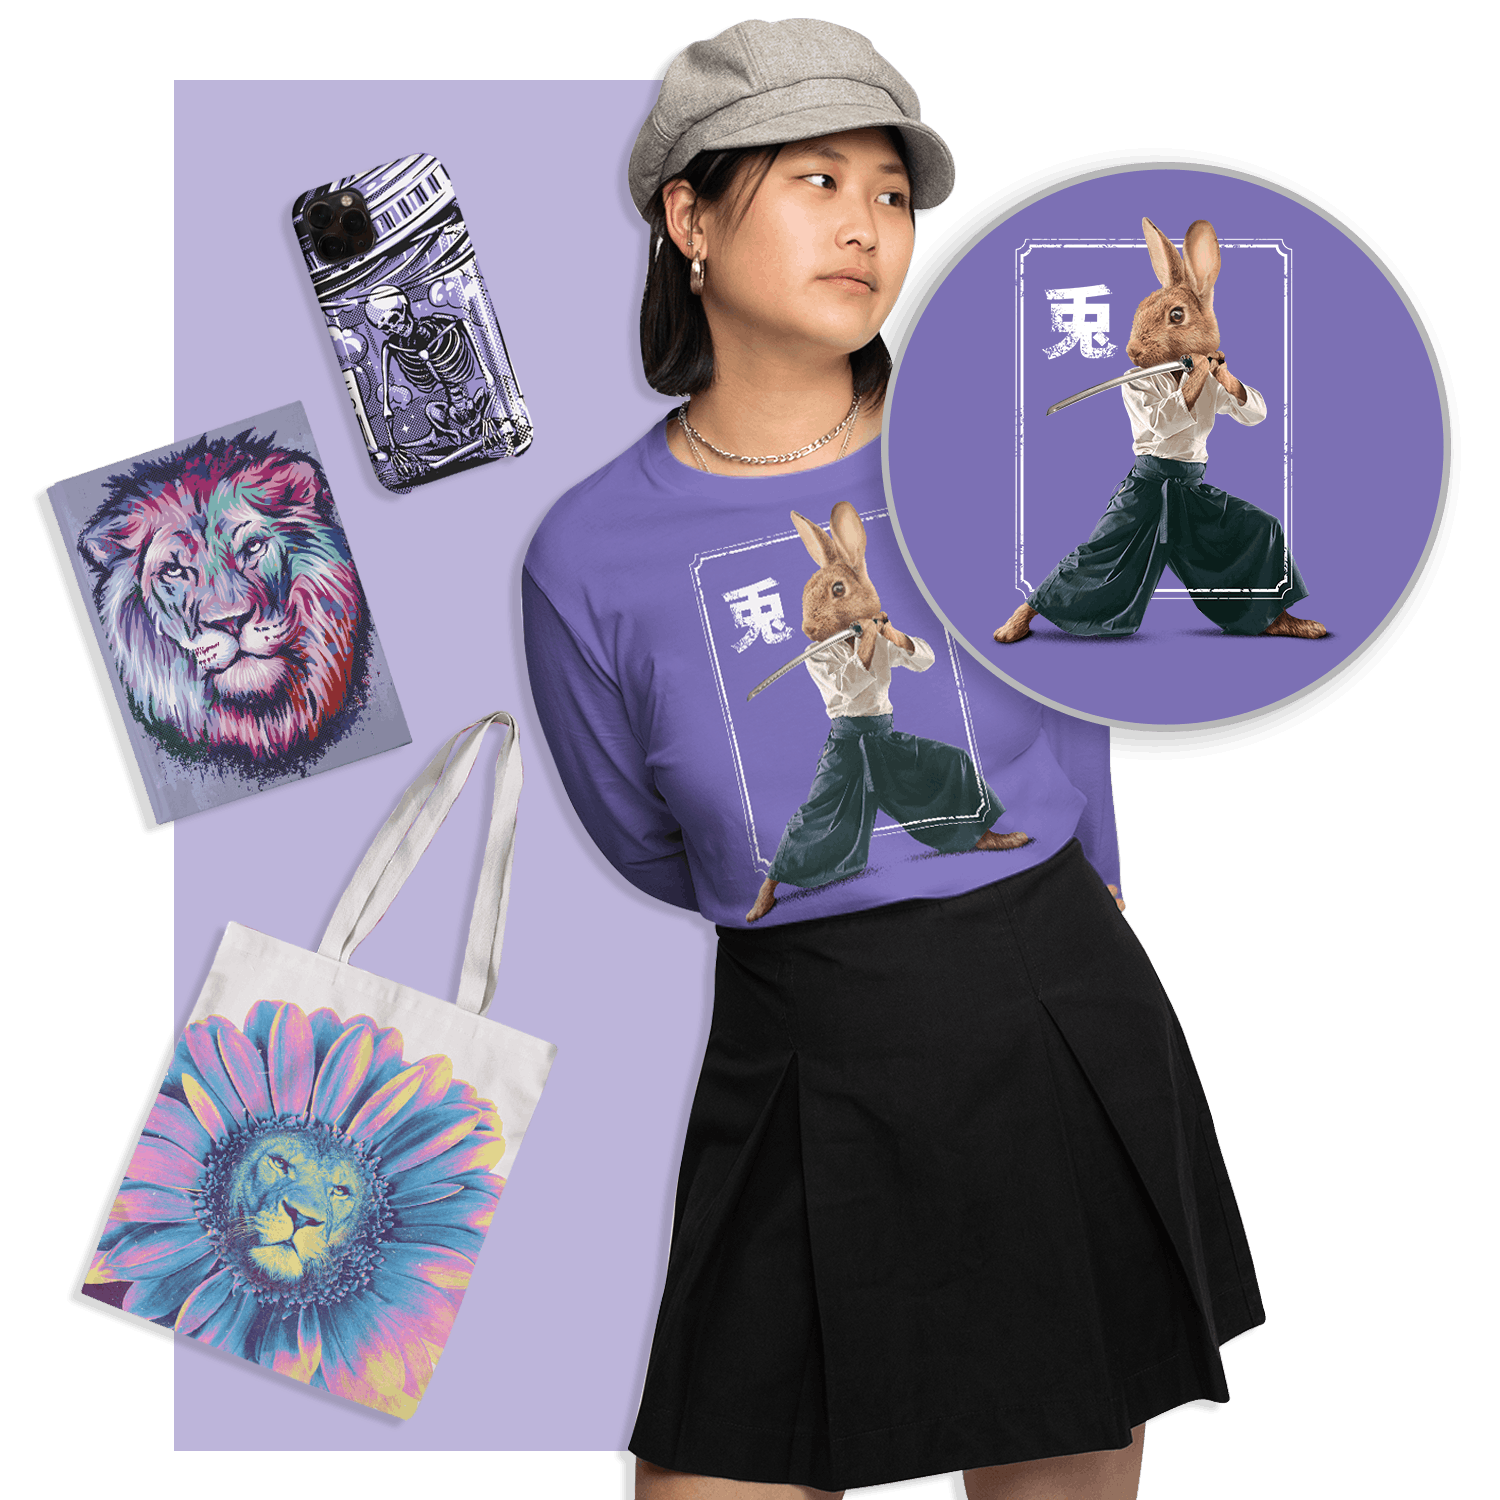 different merch products used by a model